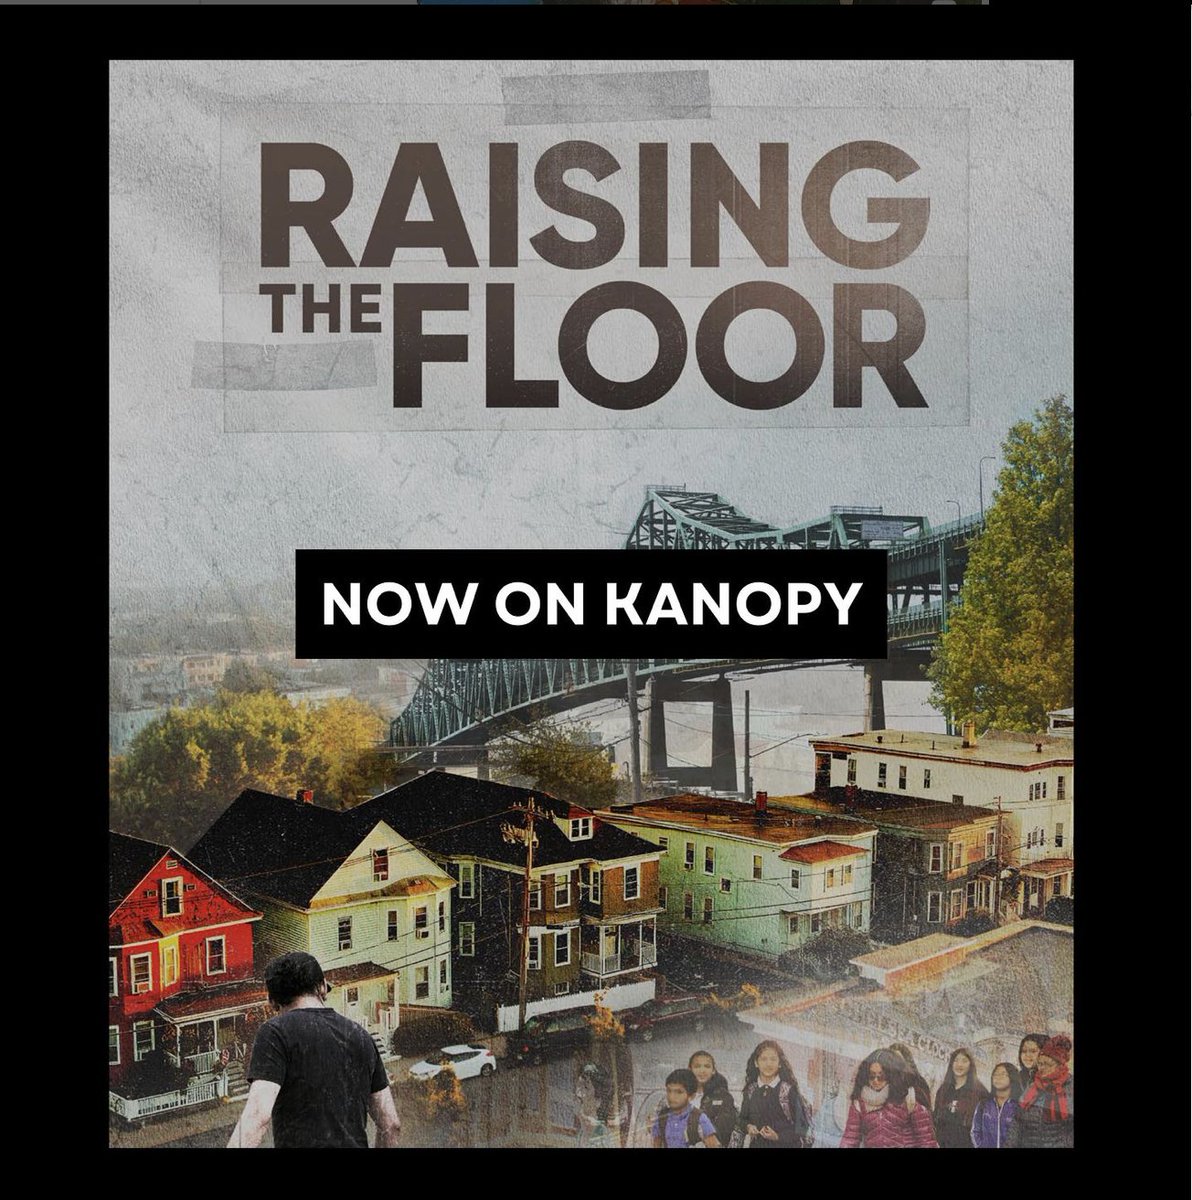 ⭐️We are celebrating the premiere of RAISING THE FLOOR on @kanopy!⭐️ You can now watch the film from anywhere using your public library card or university log in! kanopy.com/en/product/rai… #BasicIncome #UBI #documentary #NowStreaming